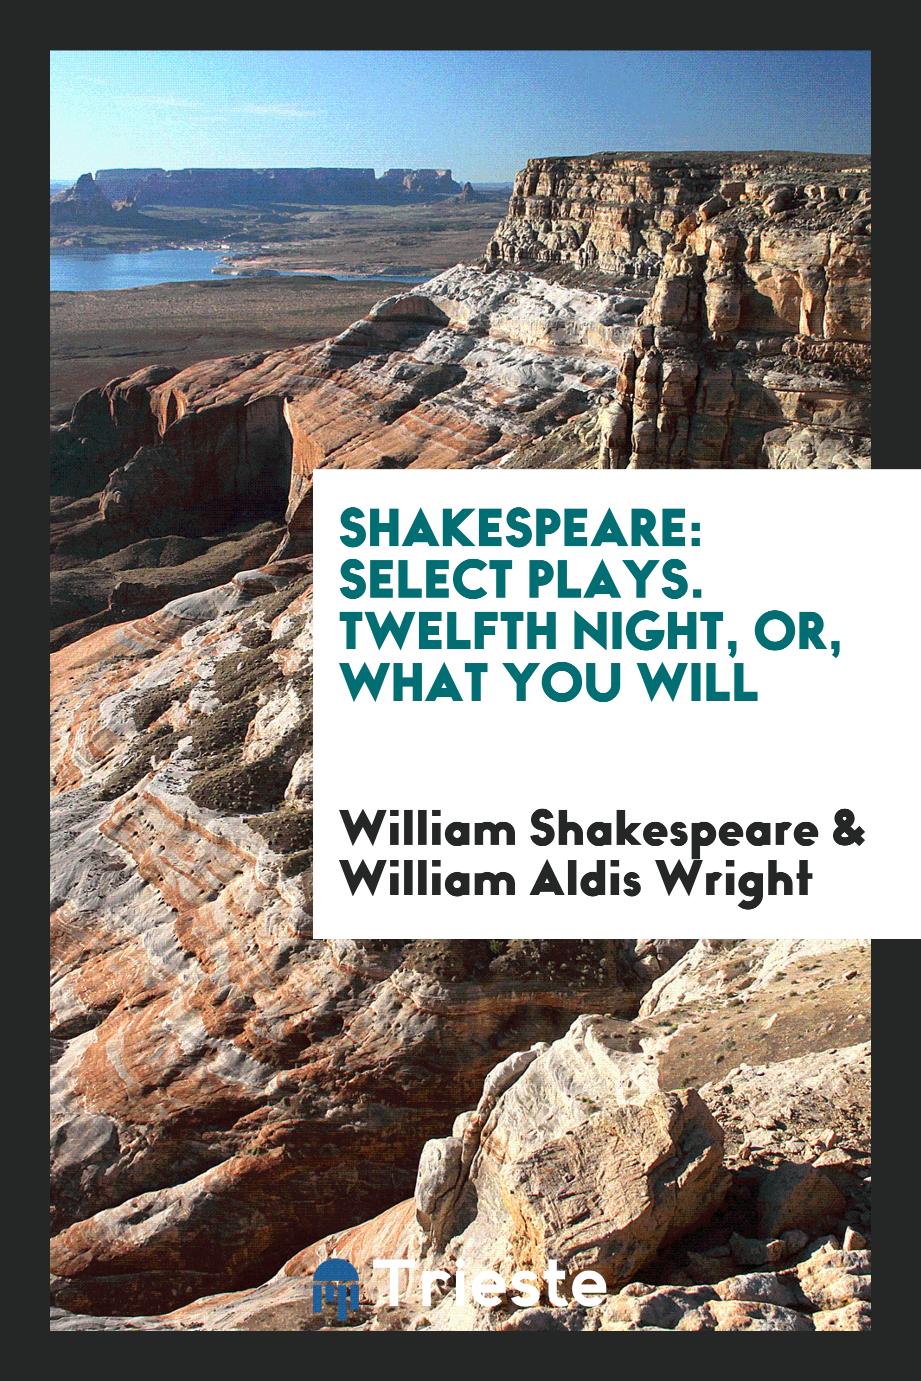 Shakespeare: Select Plays. Twelfth Night, or, What You Will